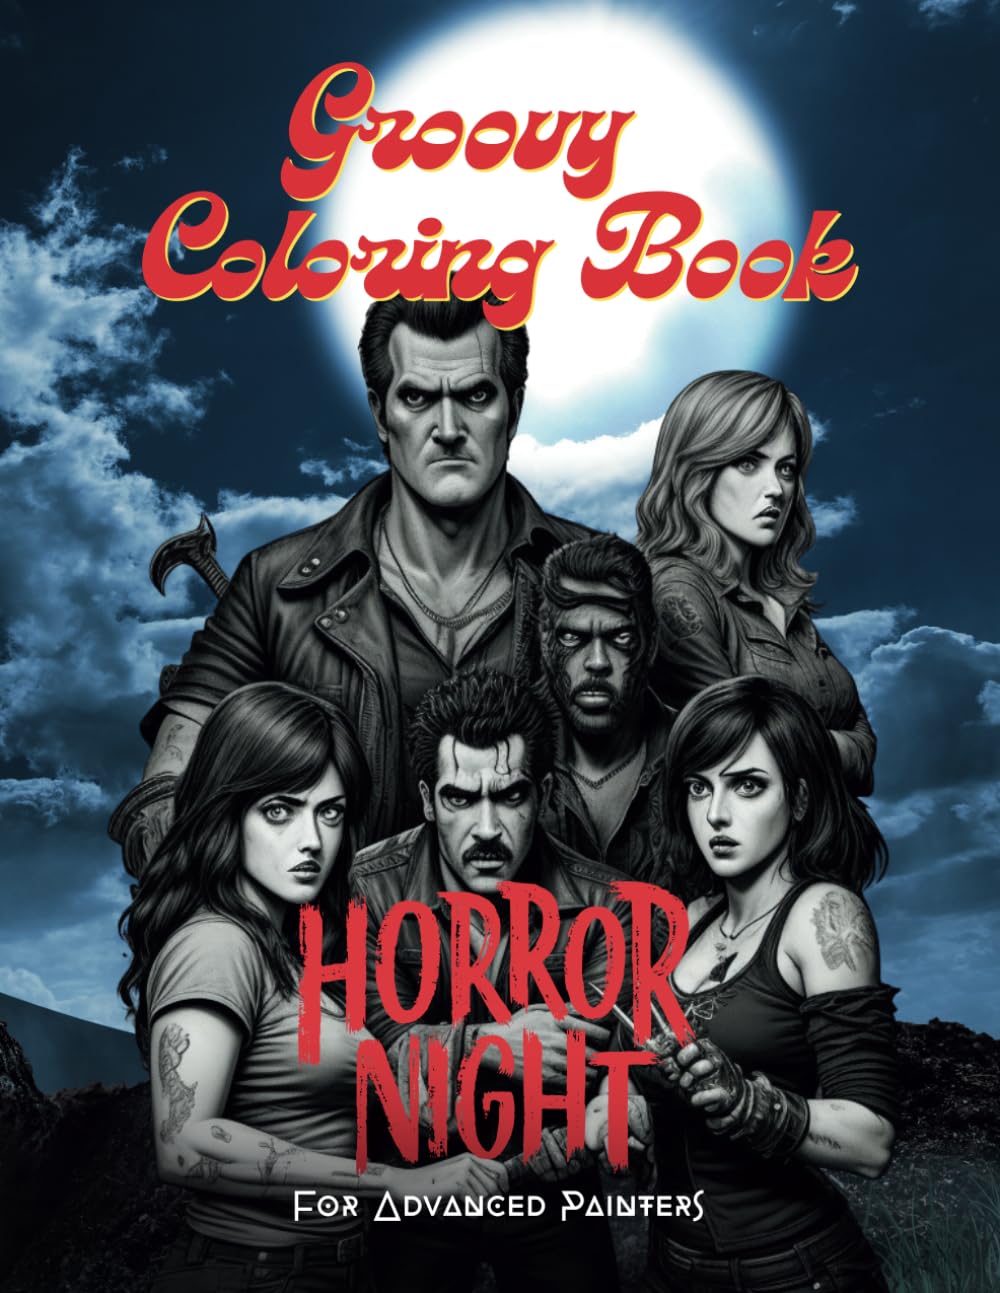 Groovy Coloring book, Horror Night, 30 advanced Images to color or sketch (German Edition)